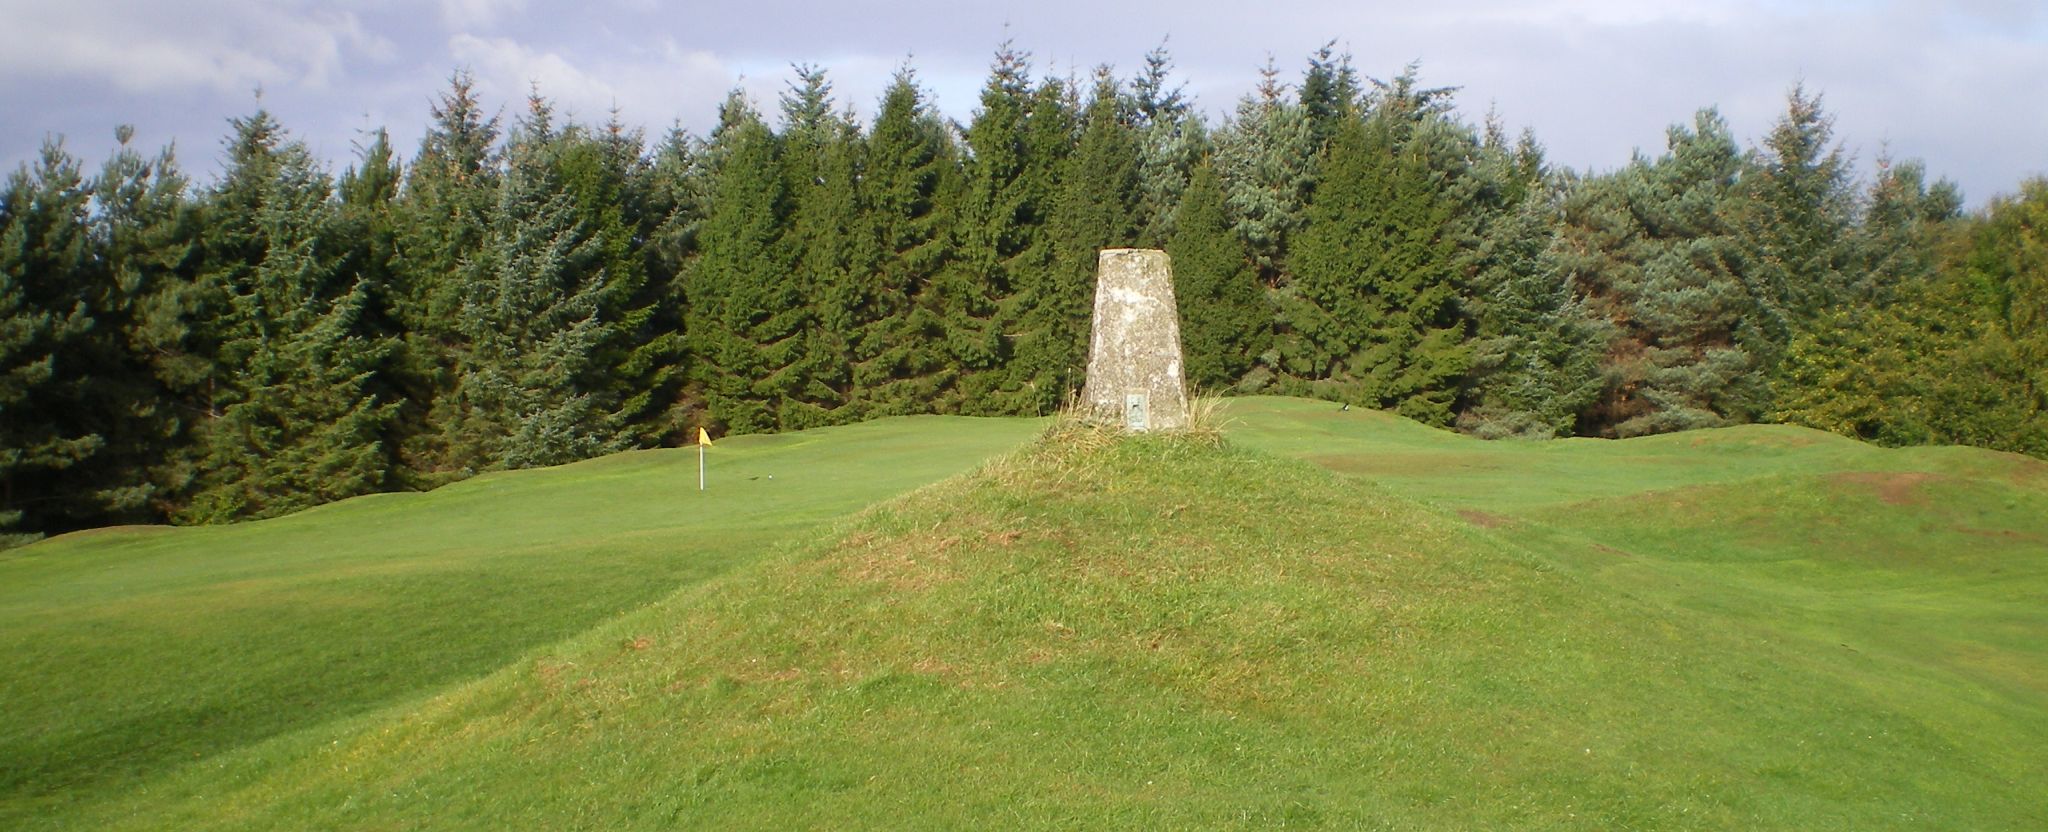 Trig point on Byres Hill on Barshaw golf course